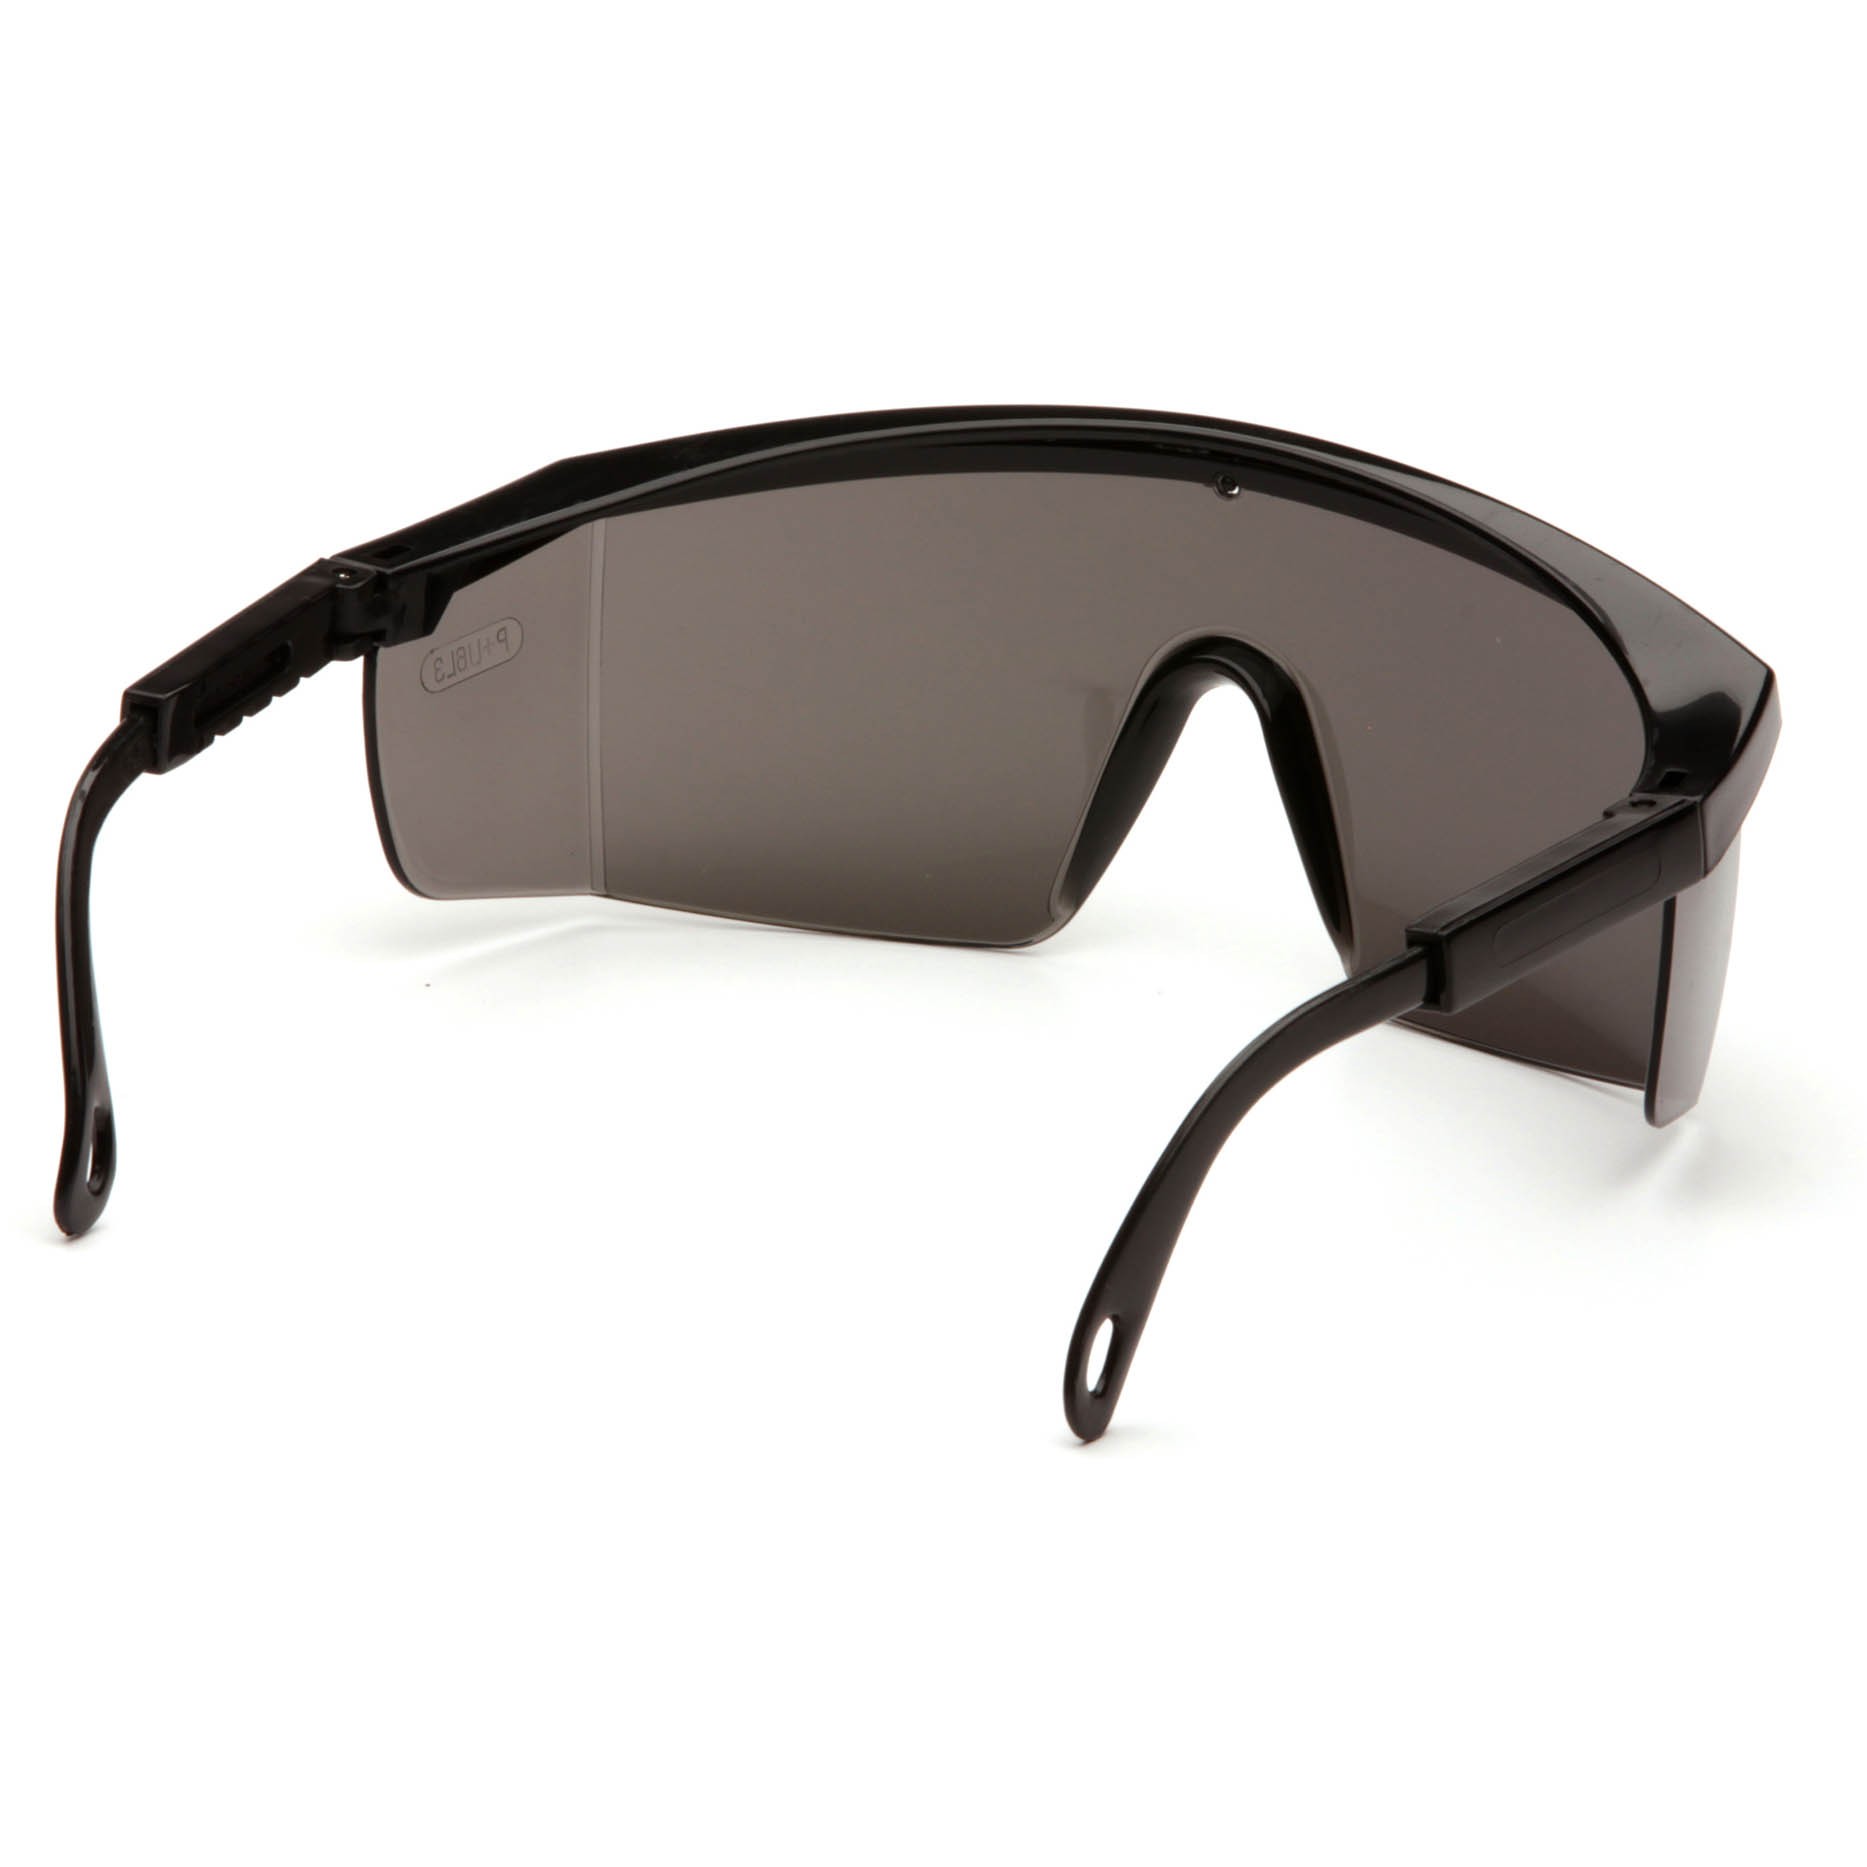 Pyramex SB420S Integra Safety Glasses With Gray Lens for sale online 